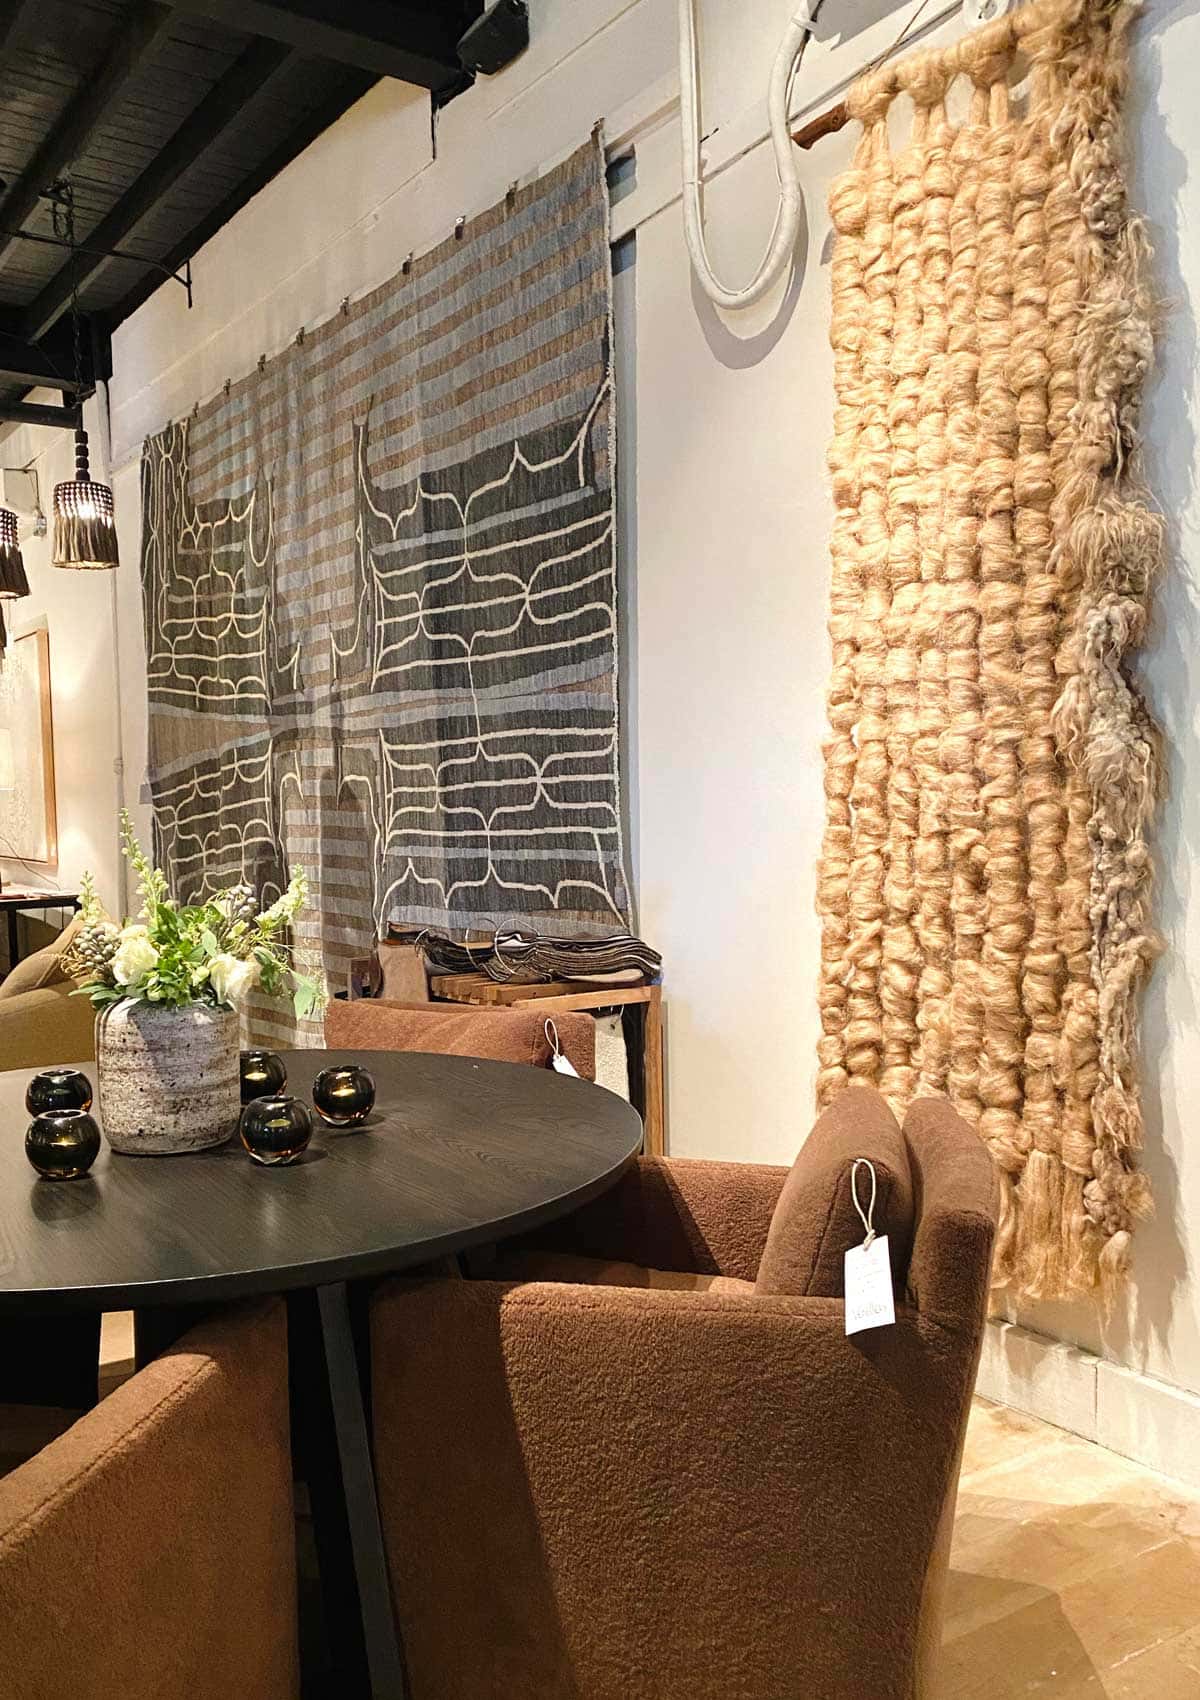 Interior Design Trends - New take on macramé and textile wall art